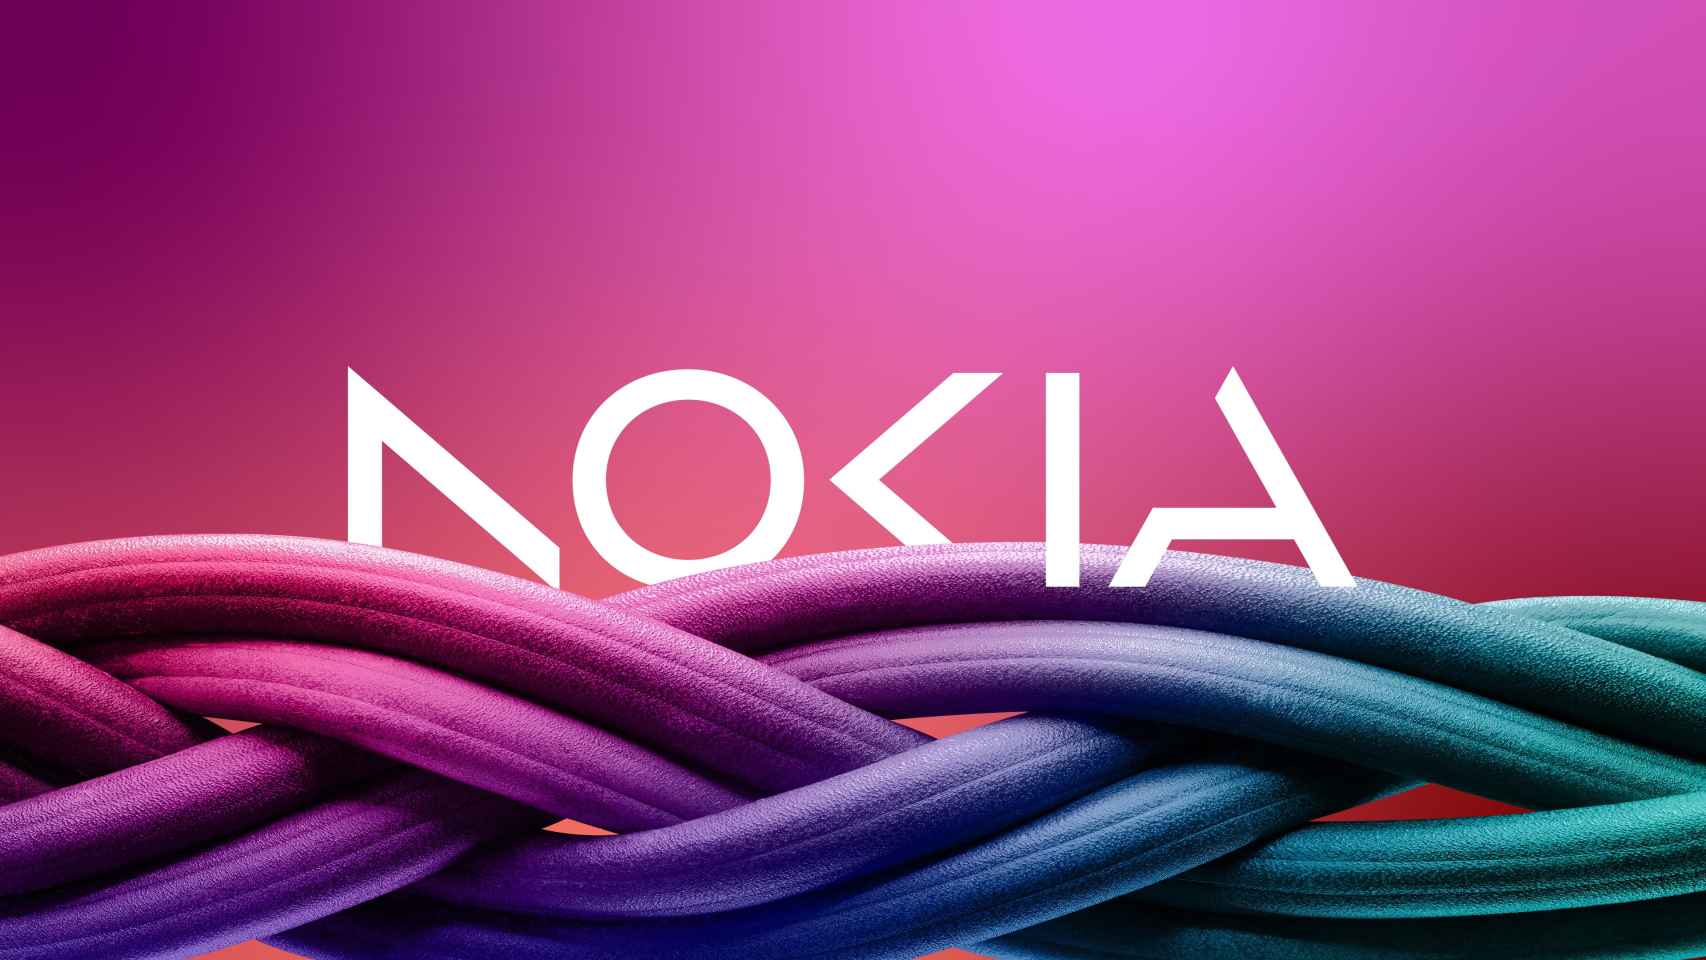 The Nokia of networks has recently changed its image to differentiate itself from that of mobile phones